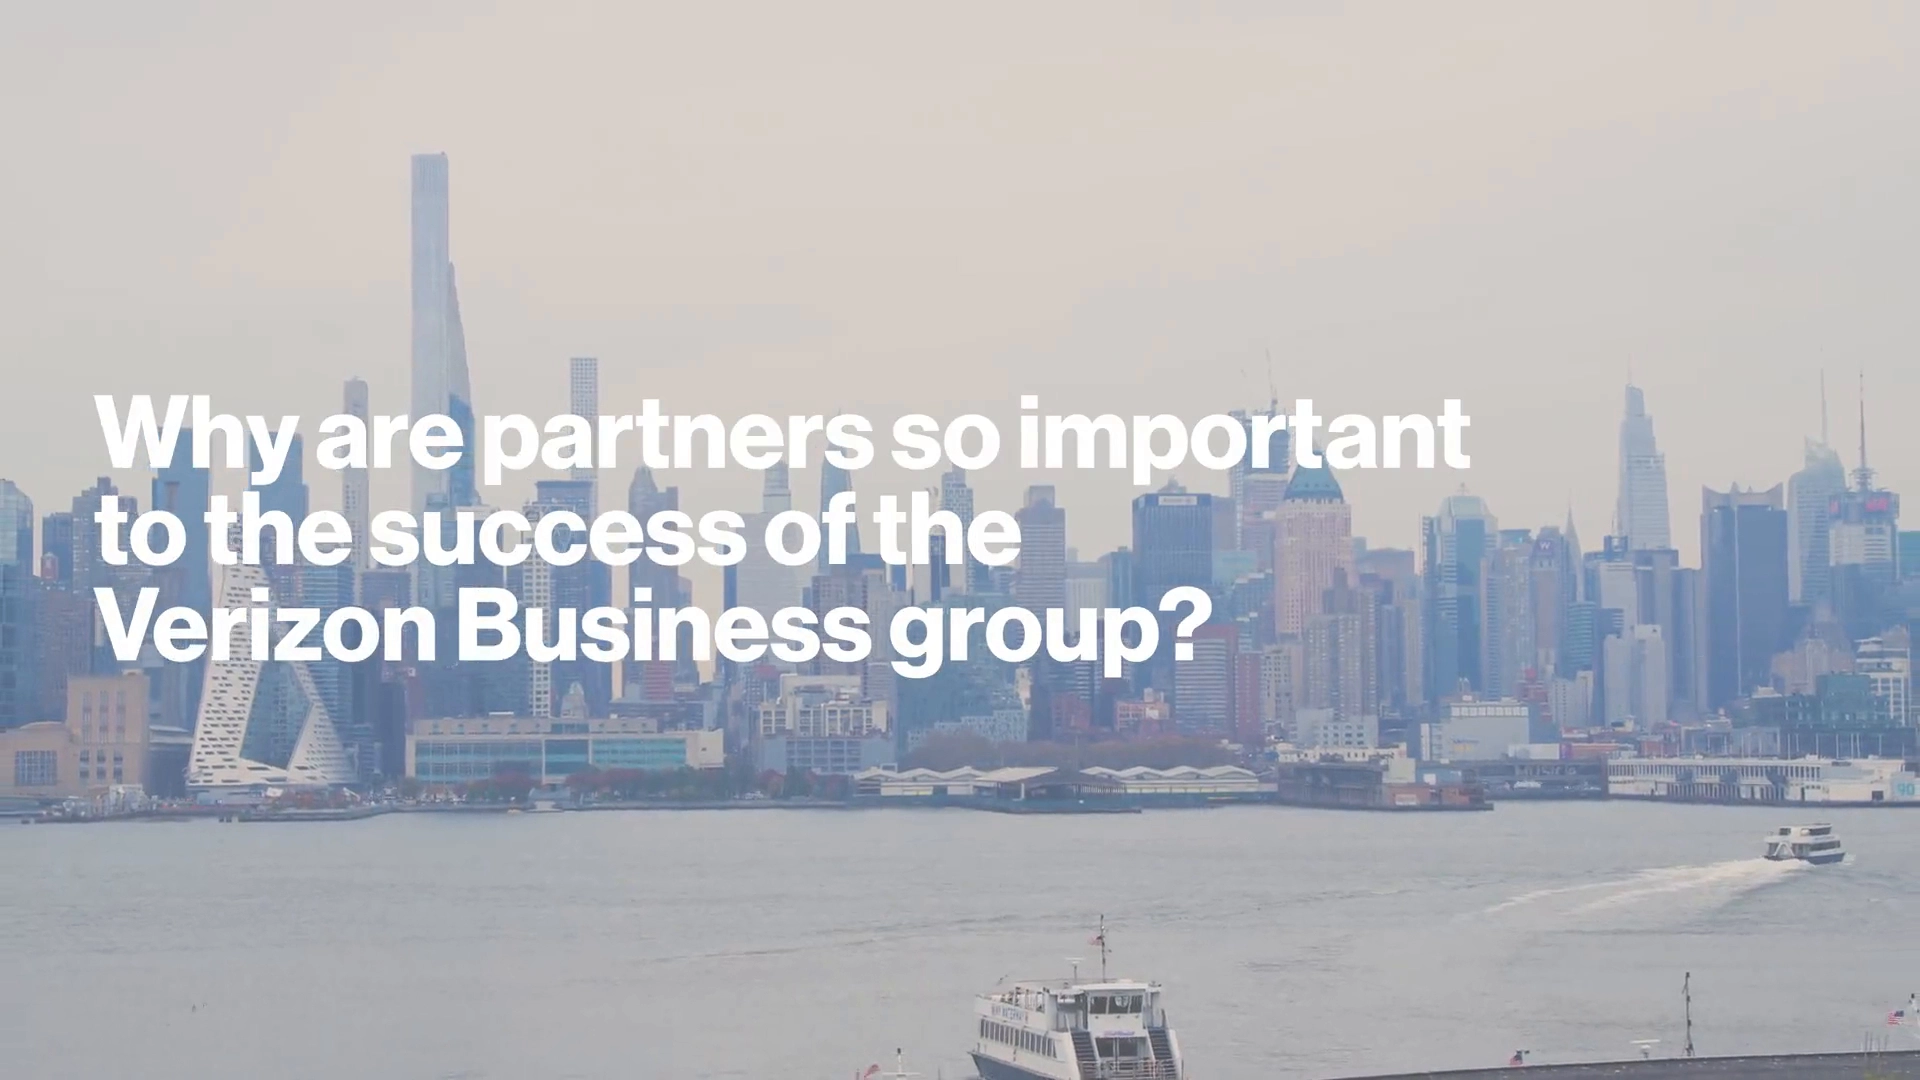 Why are partners so important to the success of Verizon Business?